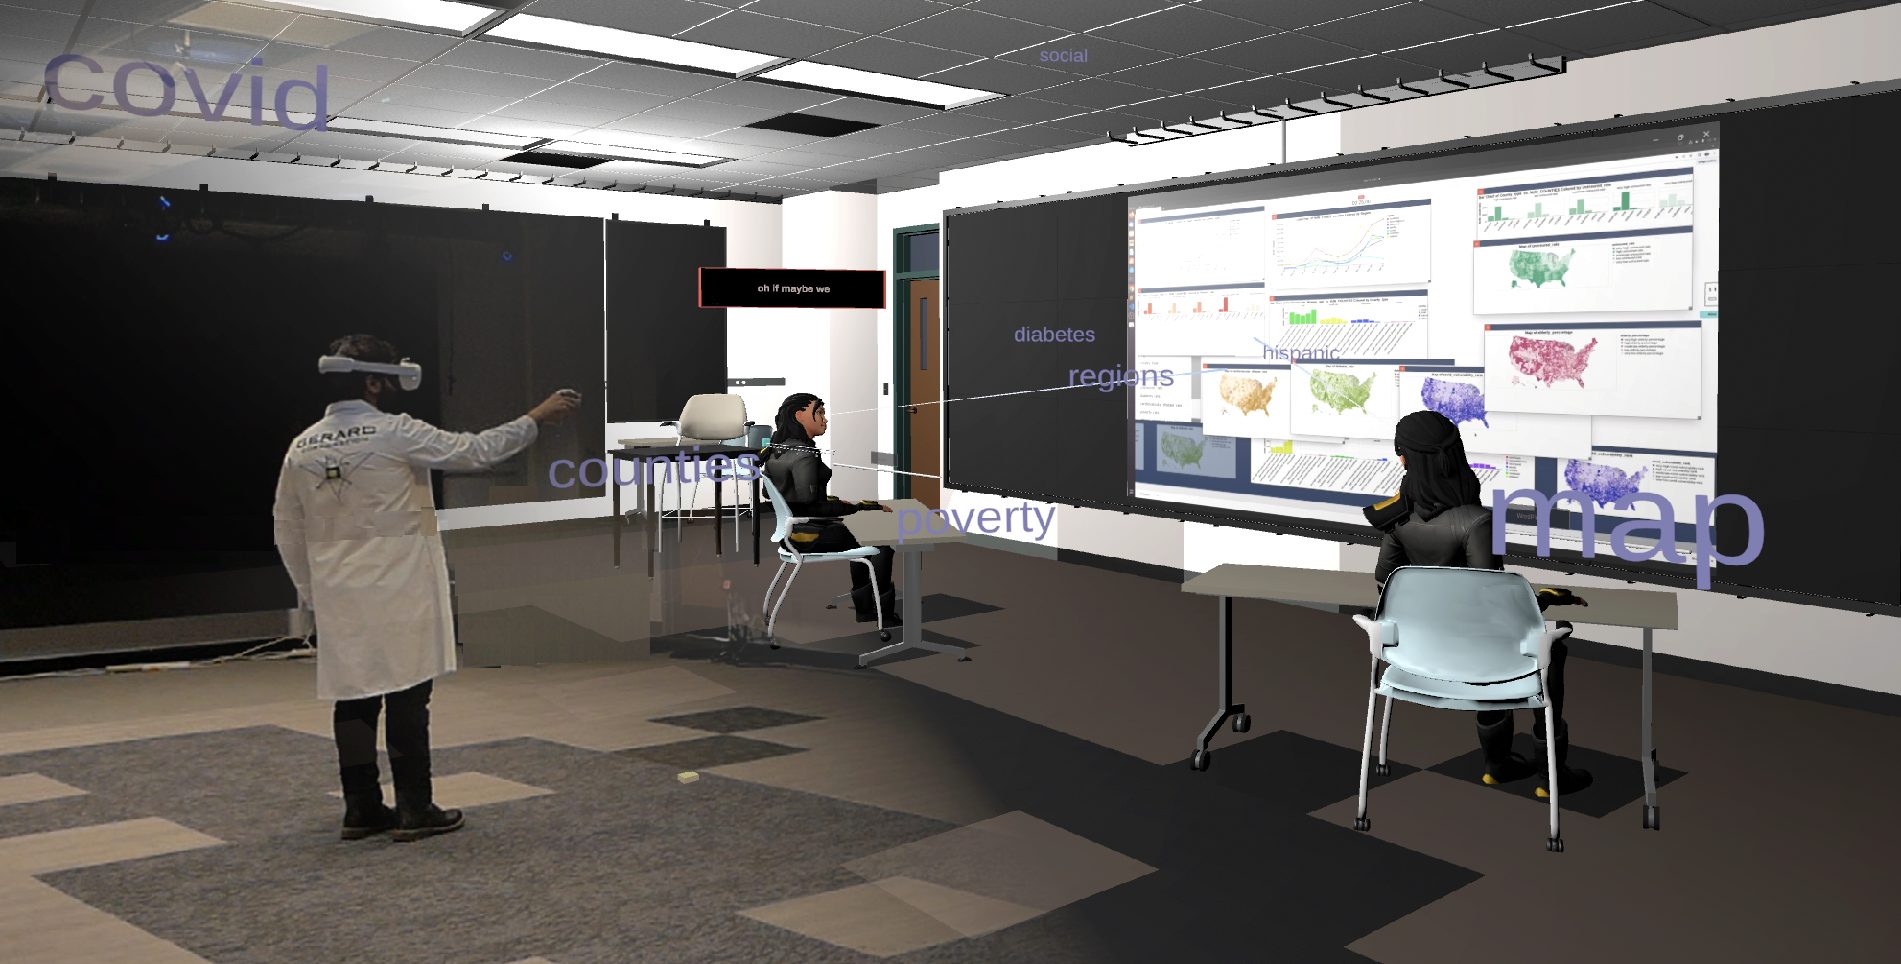 A user embedded in a conversation using Personal Situated Analytics in Virtual Reality as virtual avatars.